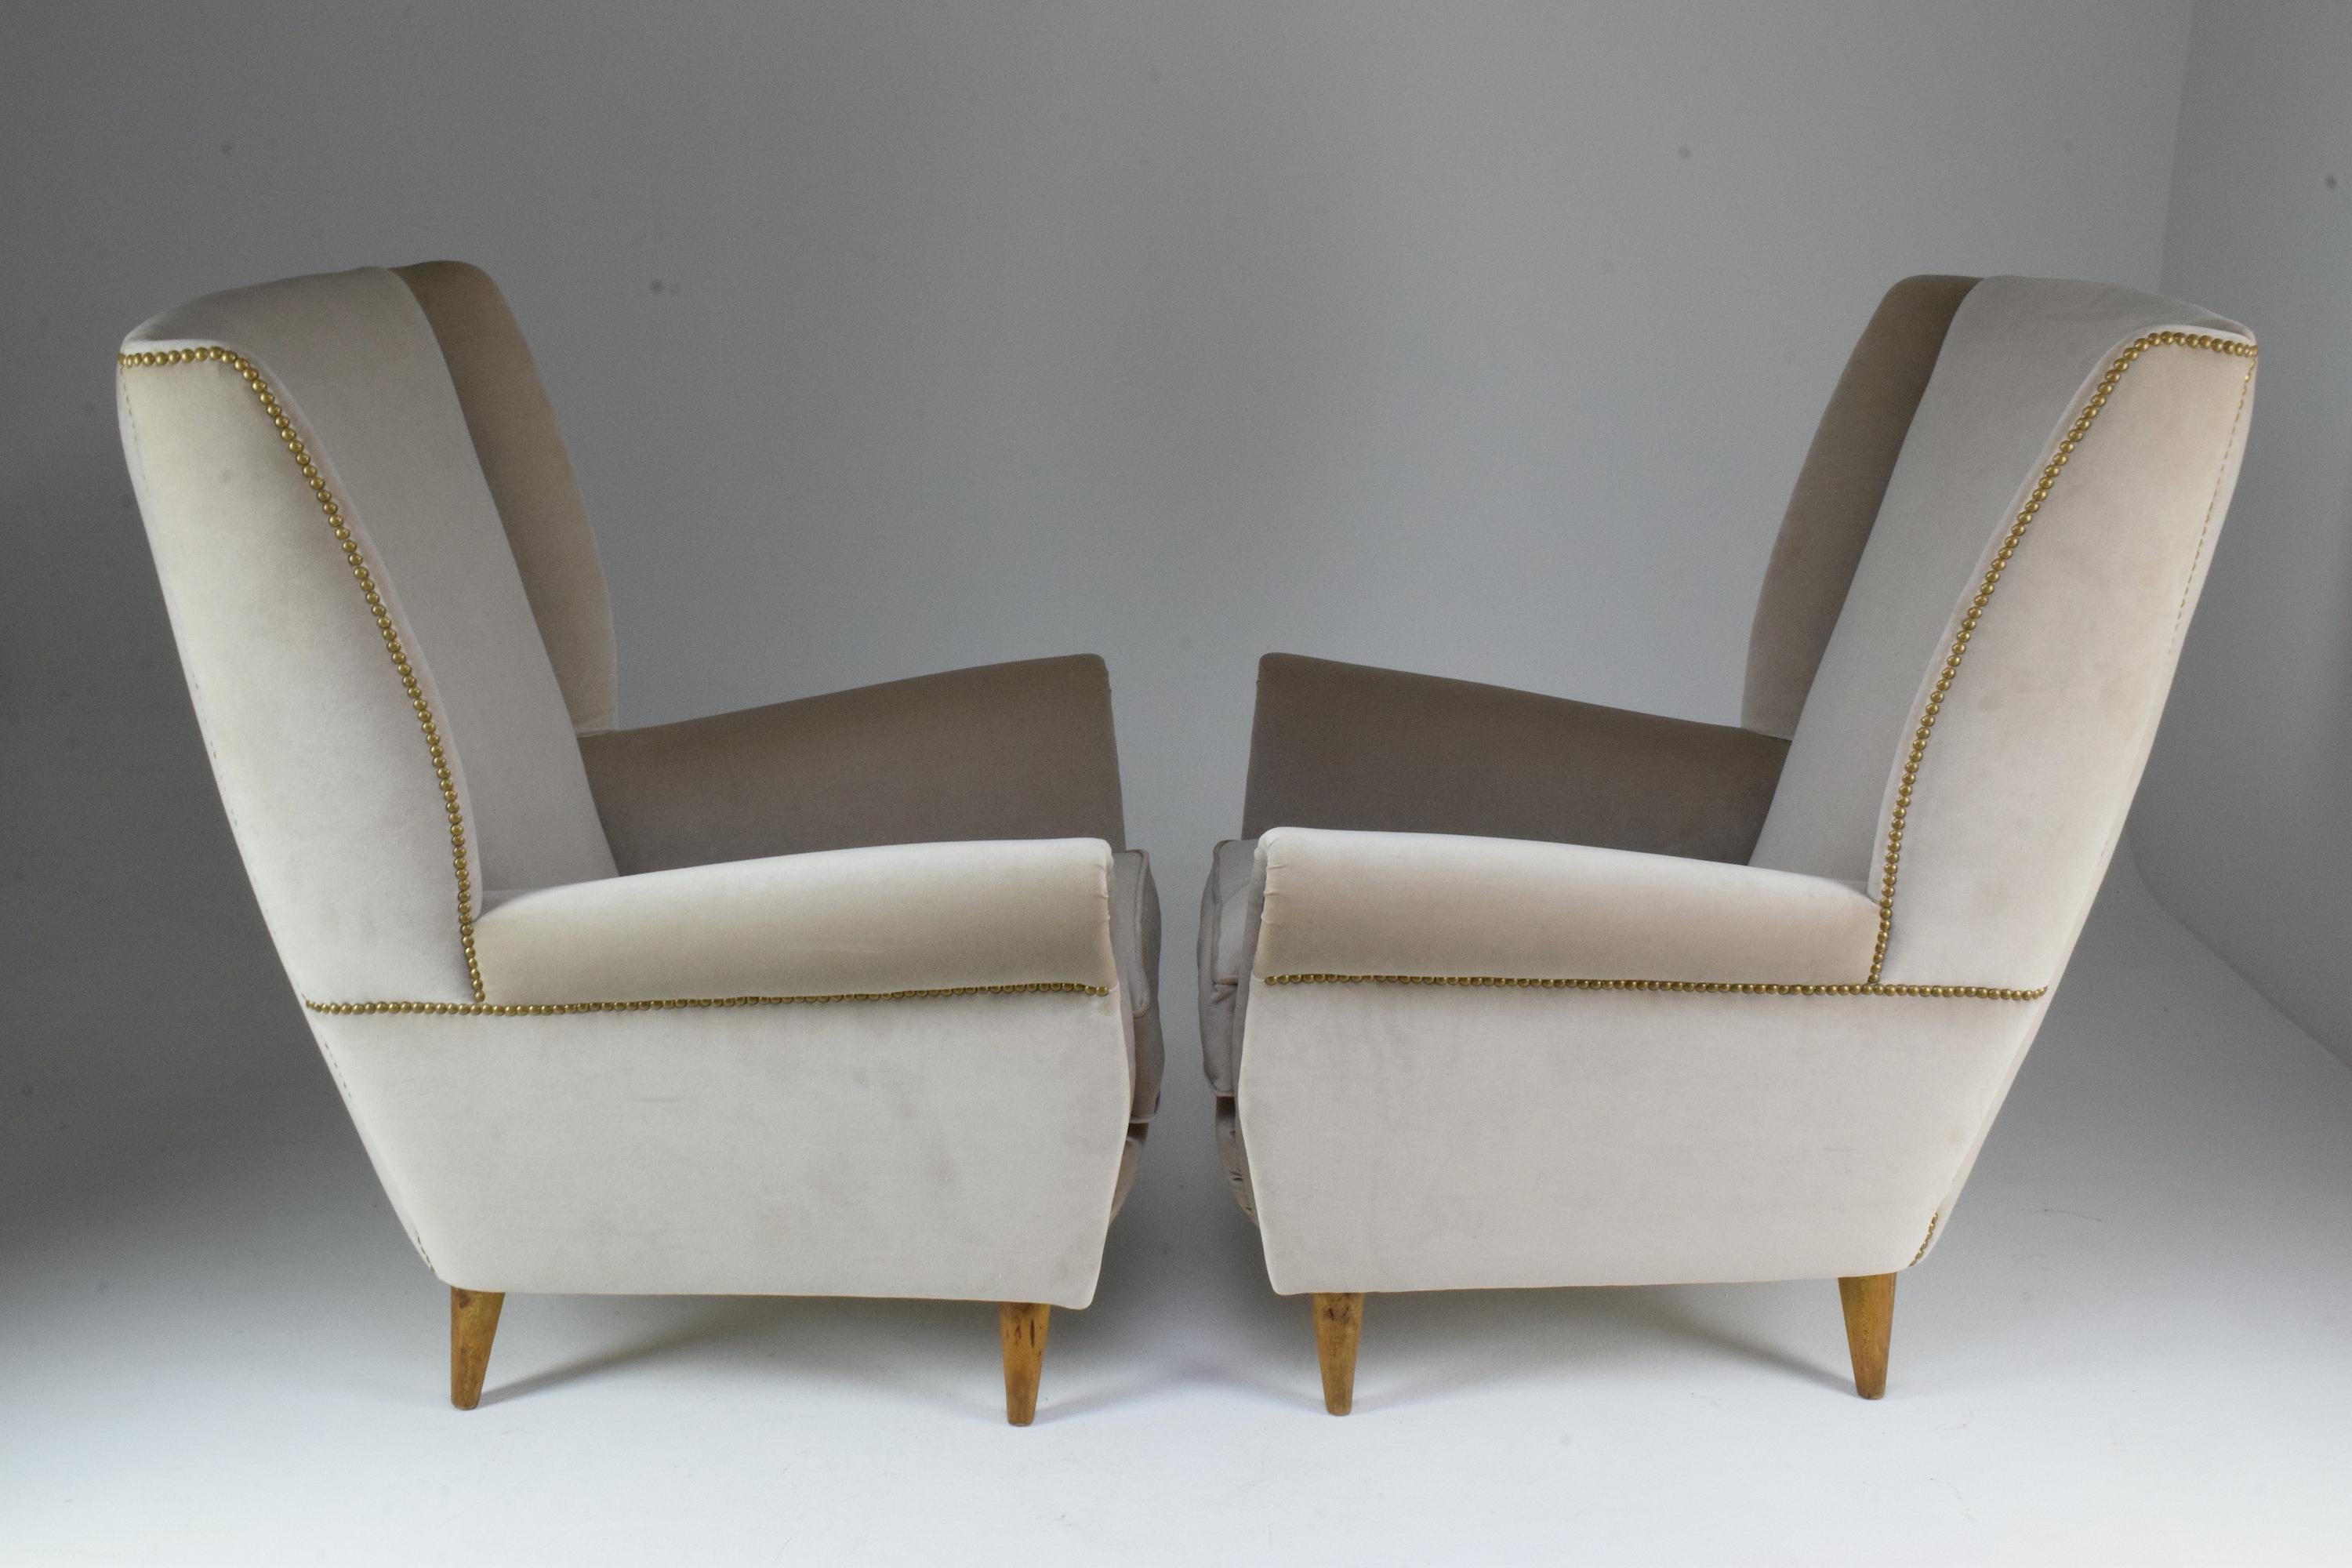 Pair of 20th Century Armchairs In the Style of Gio Ponti, 1940s For Sale 2